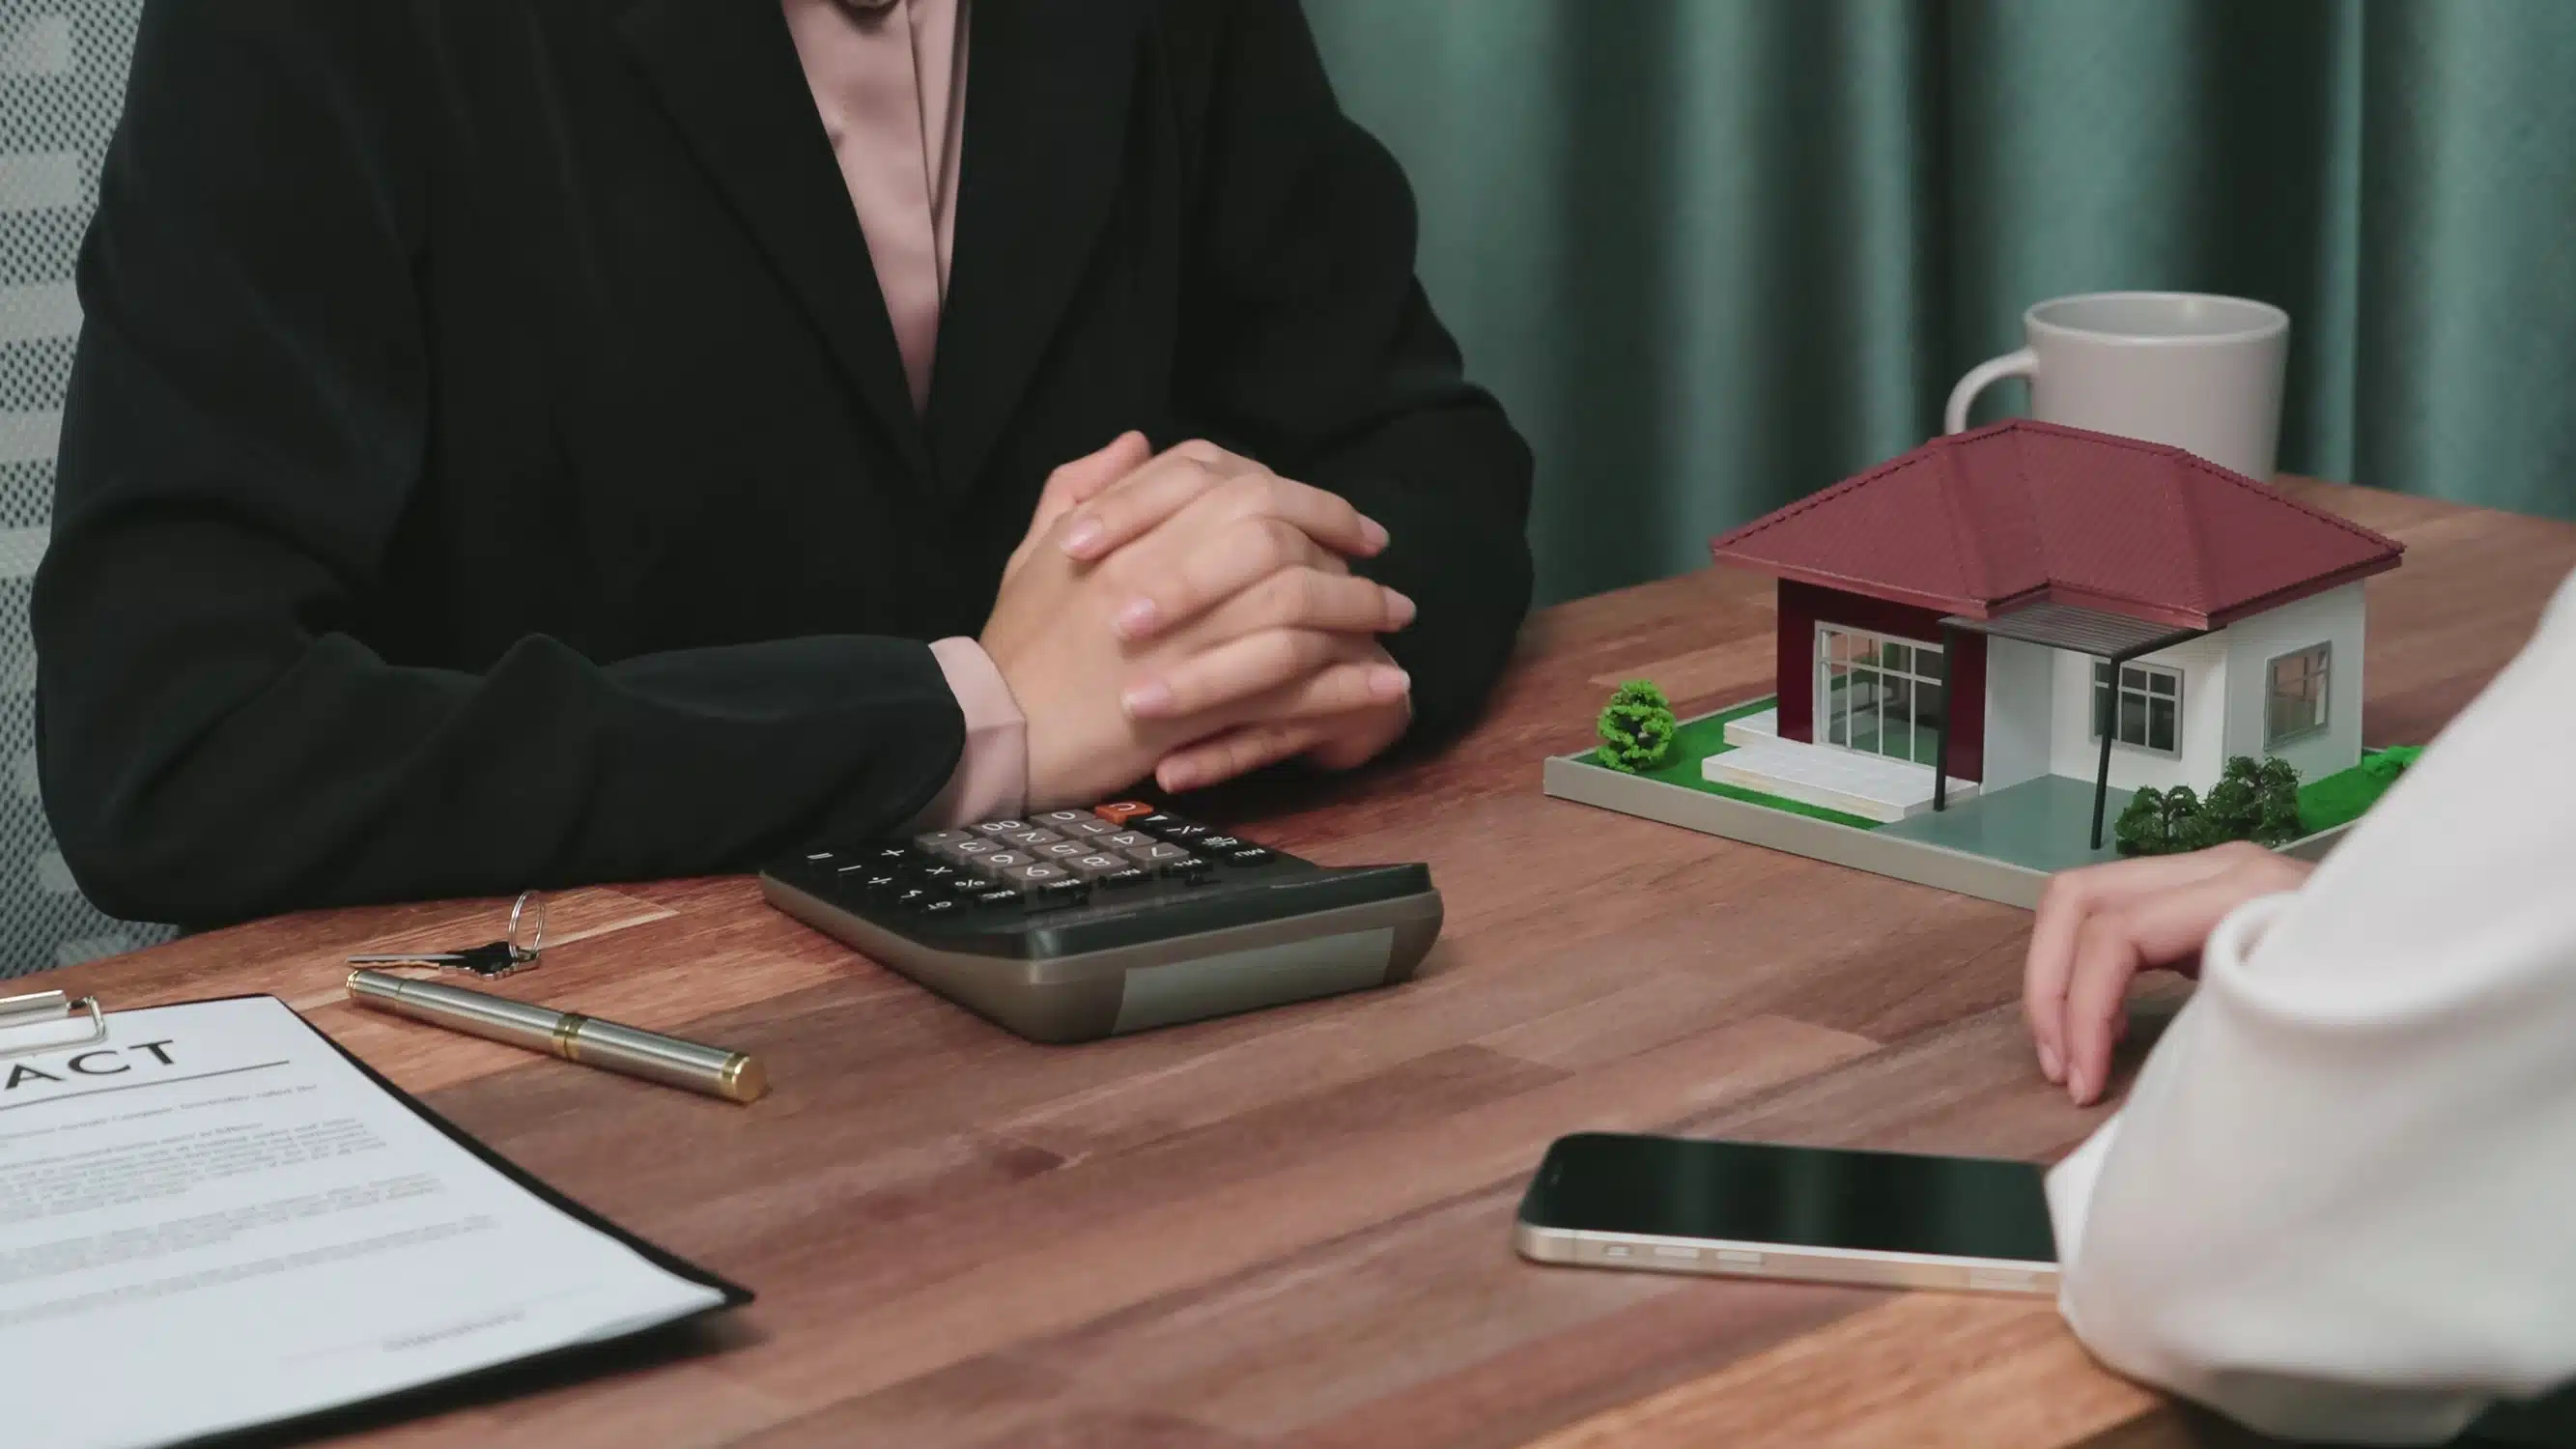 Two people at a table discussing a real estate transaction, with a contract, calculator, and model house present.